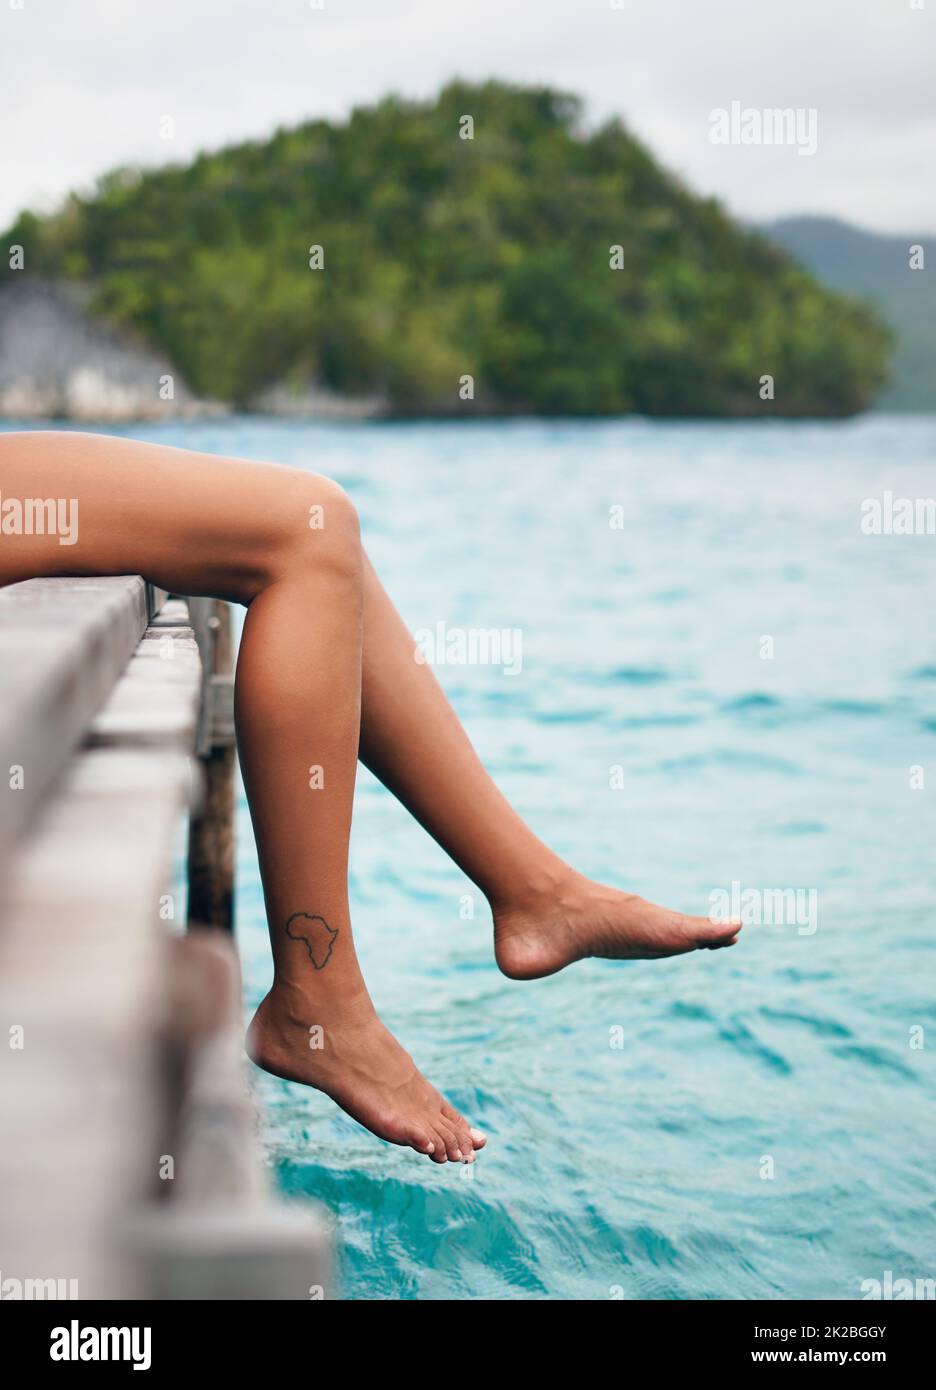 Vacation mode on. Cropped shot of an unrecognizable woman sitting and dangling her legs over the edge of a boardwalk during vacation. Stock Photo